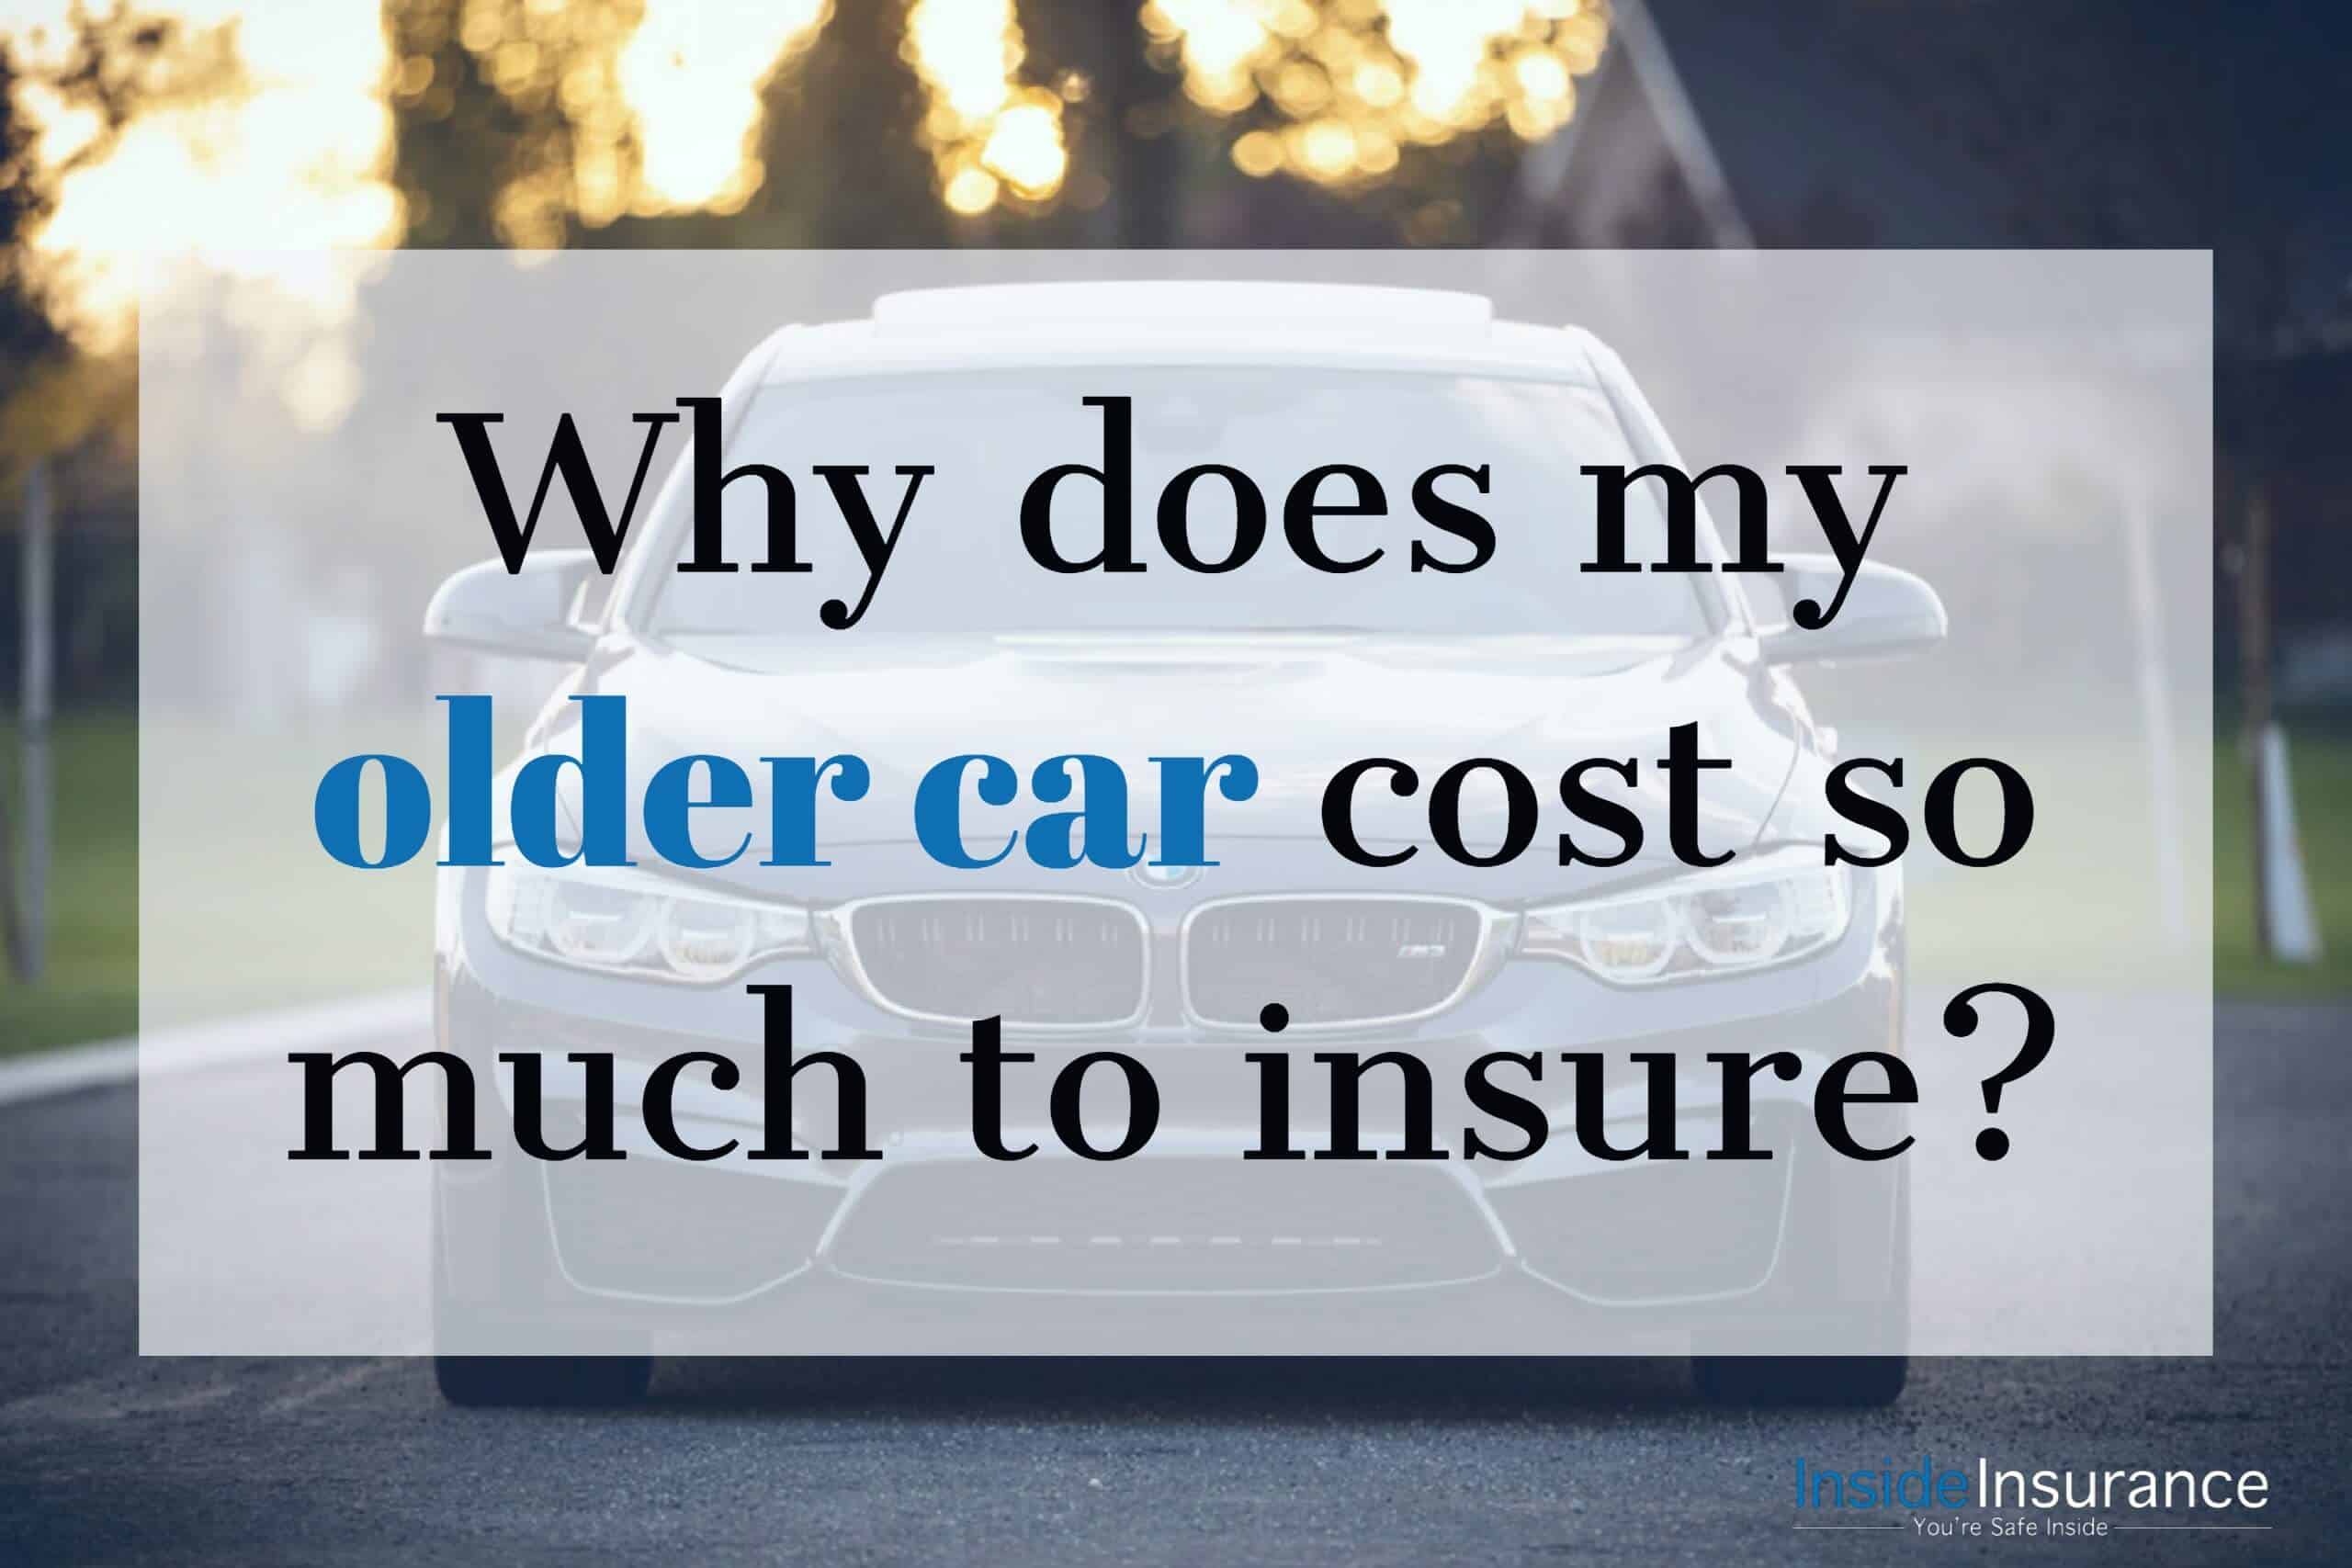 Why does my older car cost so much to insure?